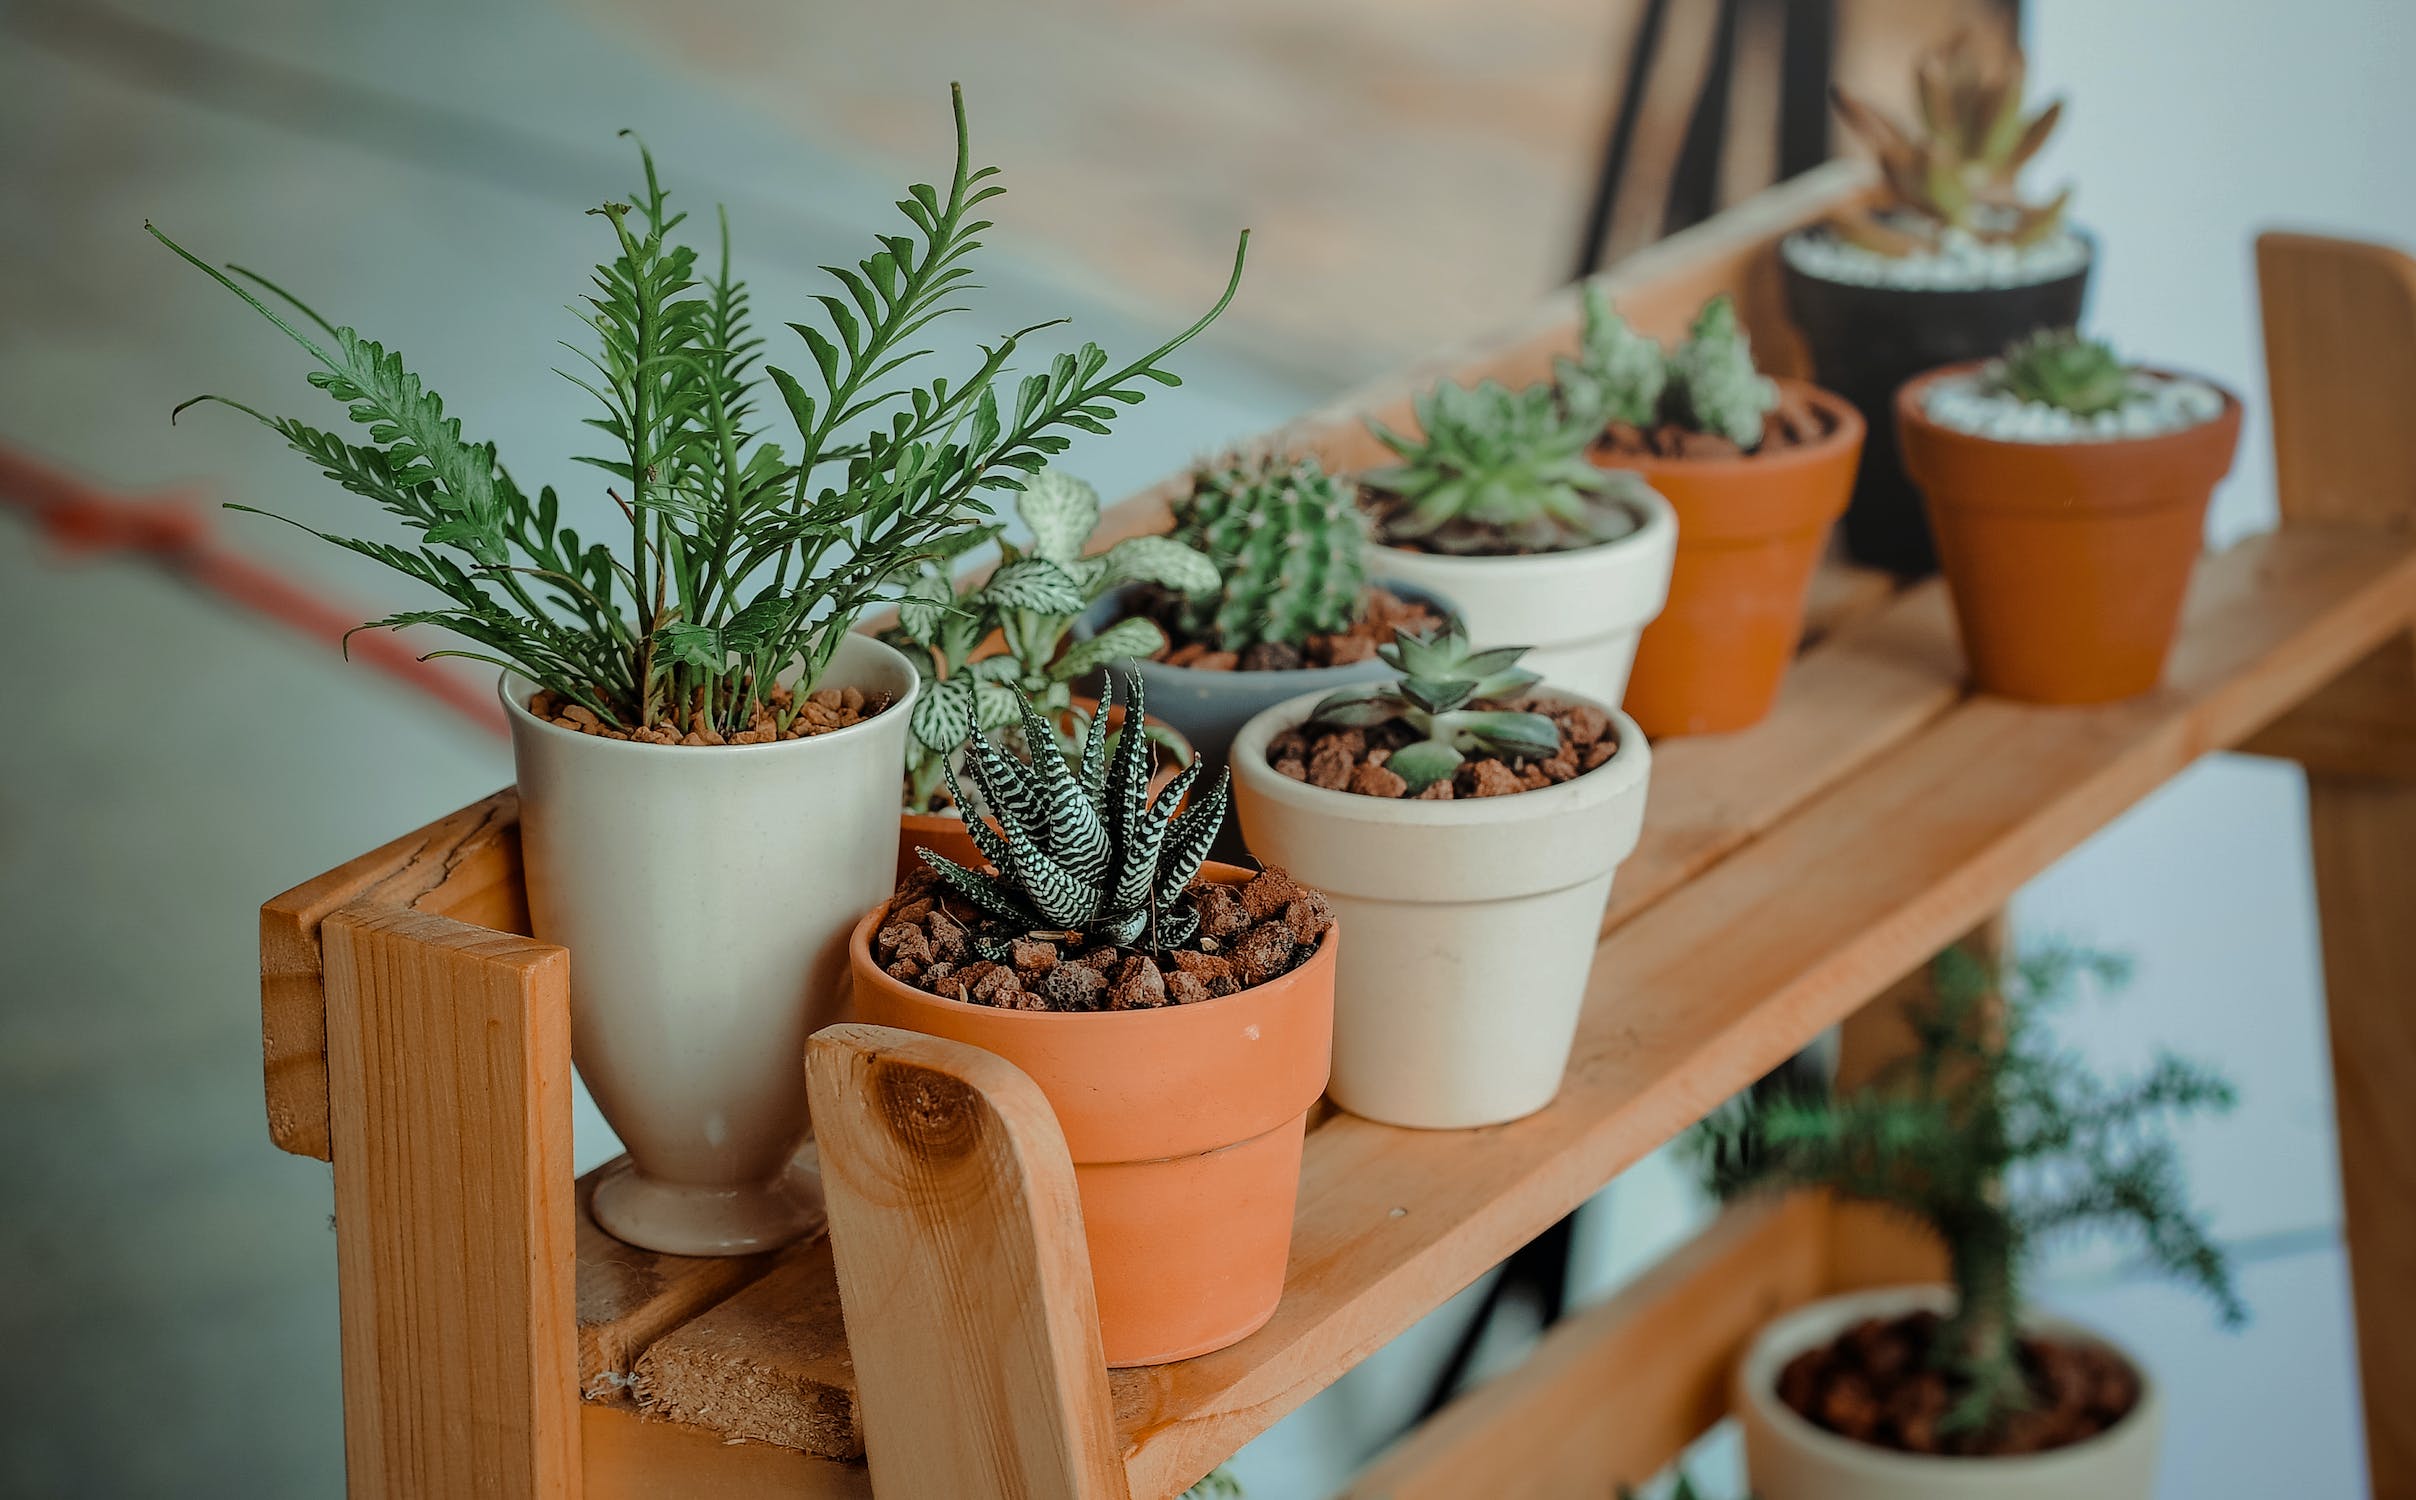 How to Care for Houseplants